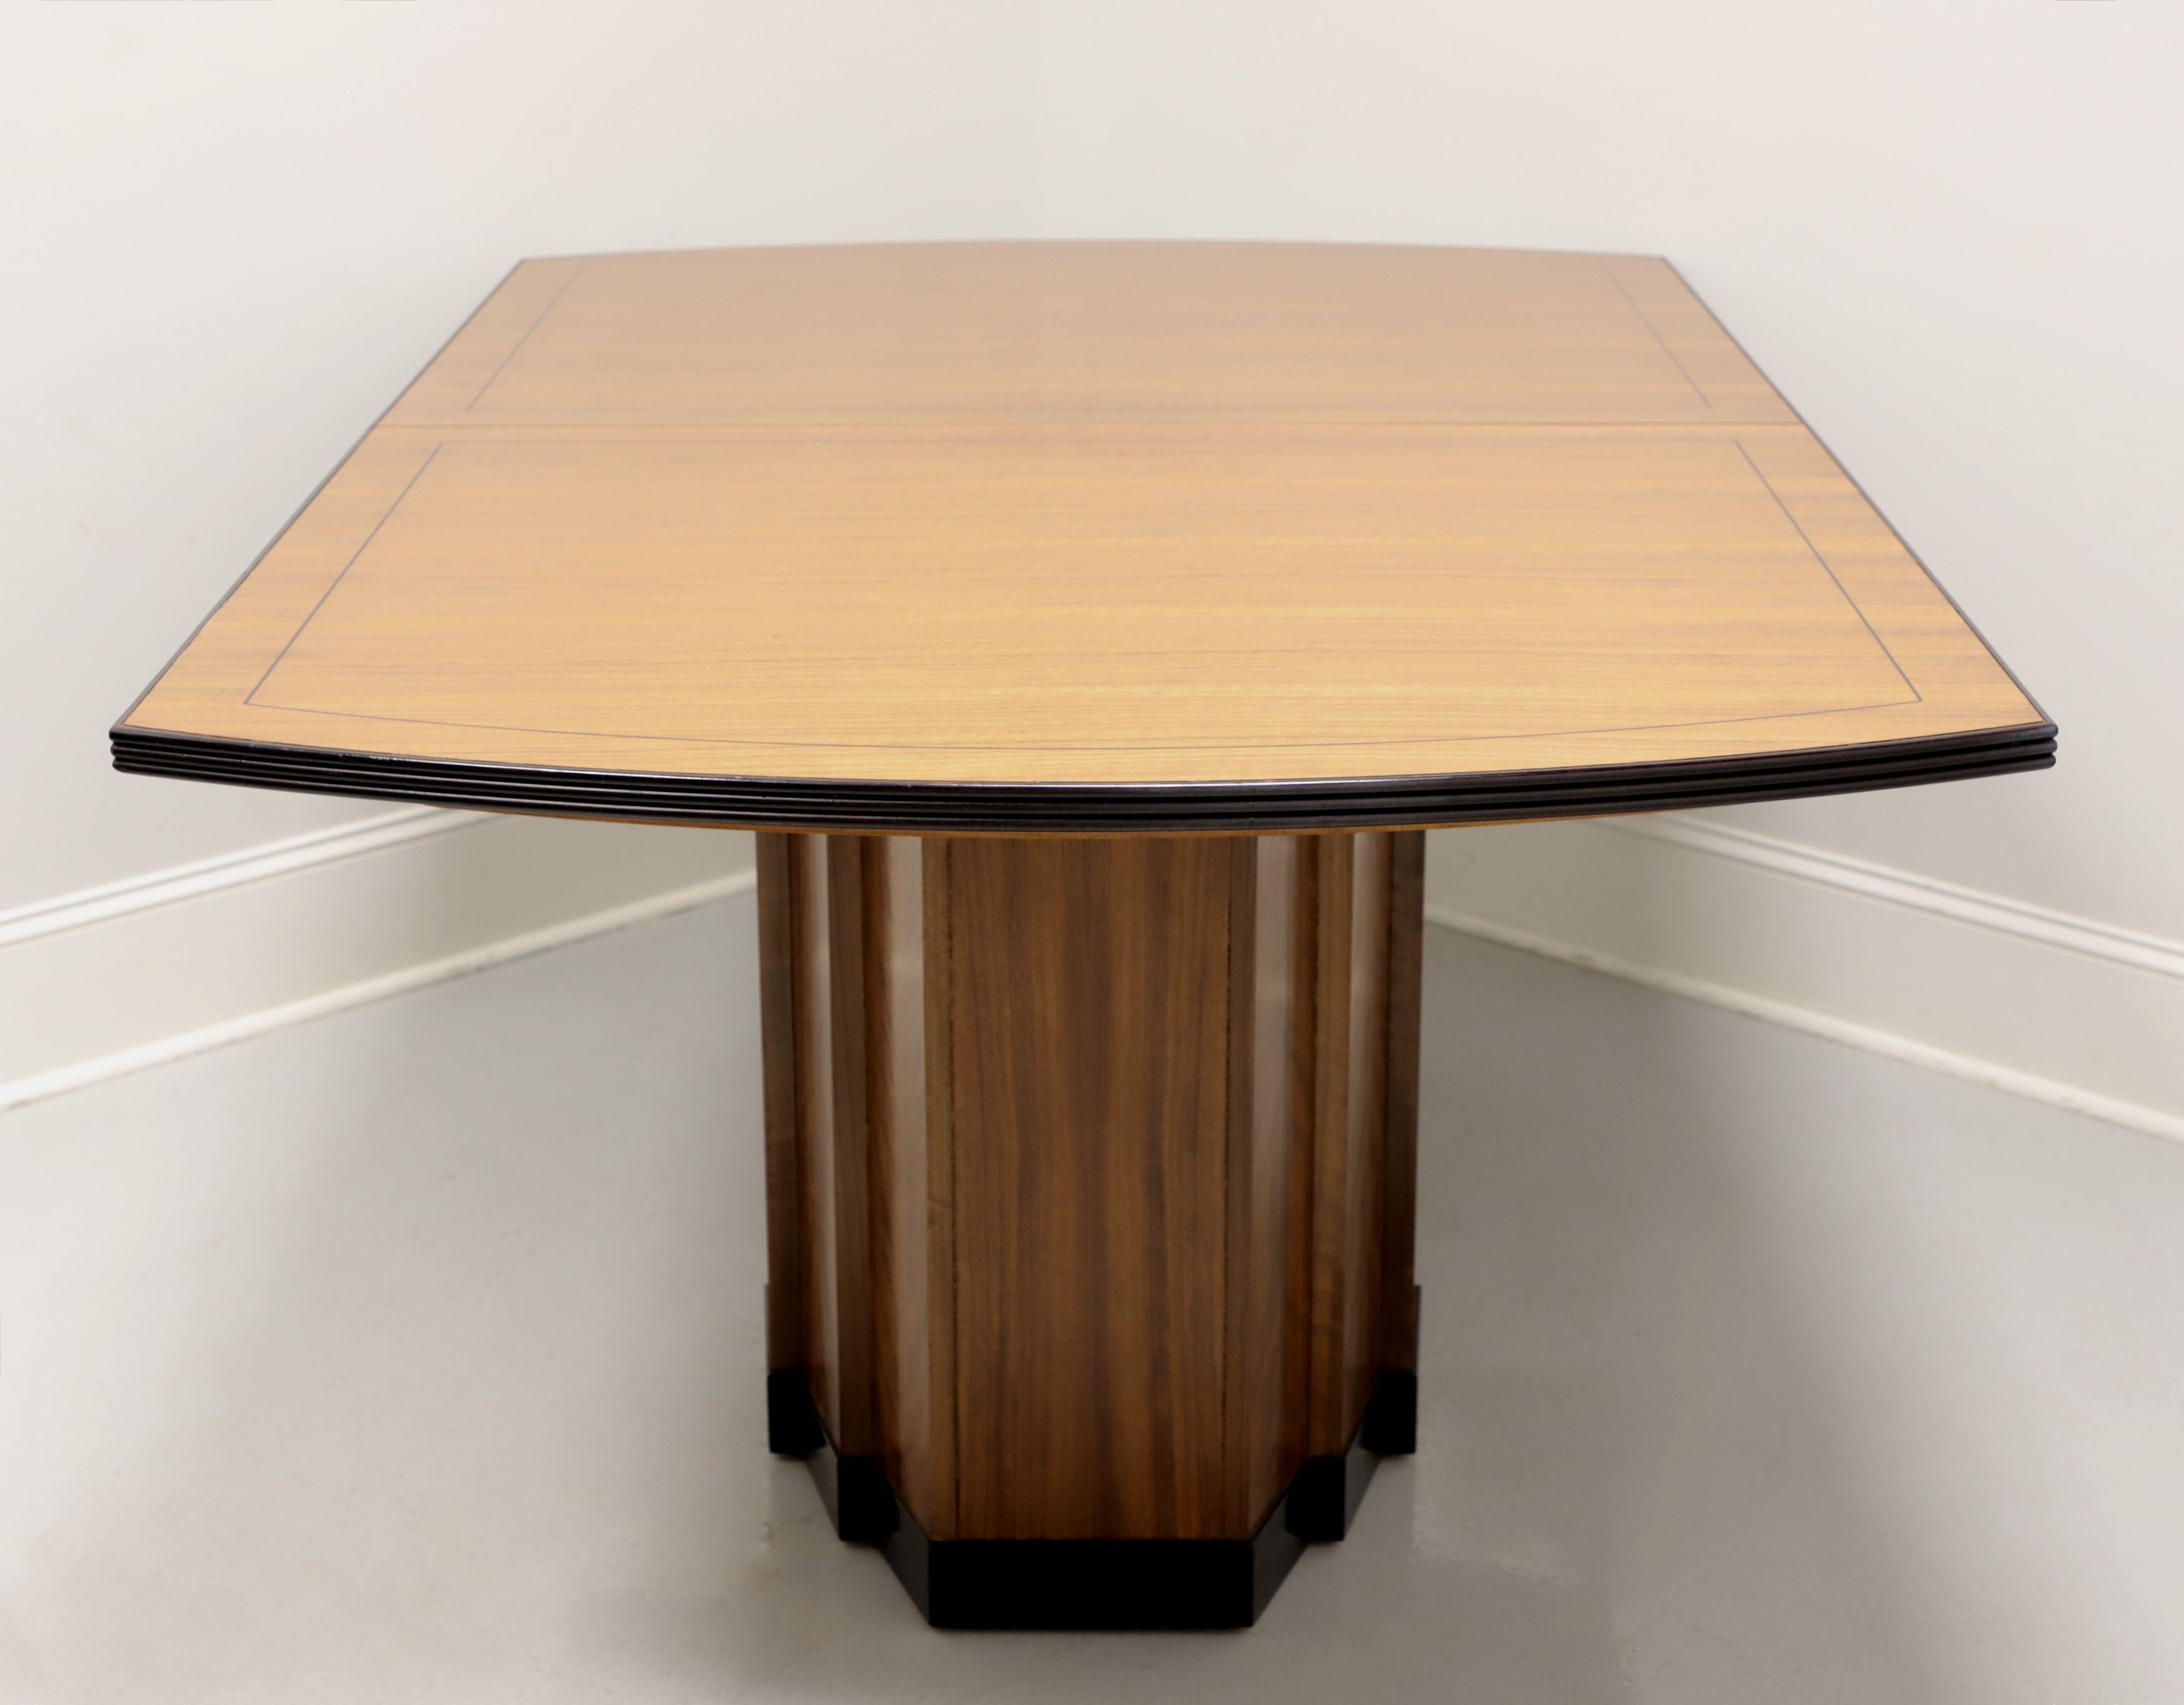 A Contemporary style rectangular dining table by Mastercraft, a division of Baker Furniture. Solid banded hardwood top with a wavy grain, rounded ends, black painted ribbed apron, an architectural flare to the veneered solid pedestal bases with